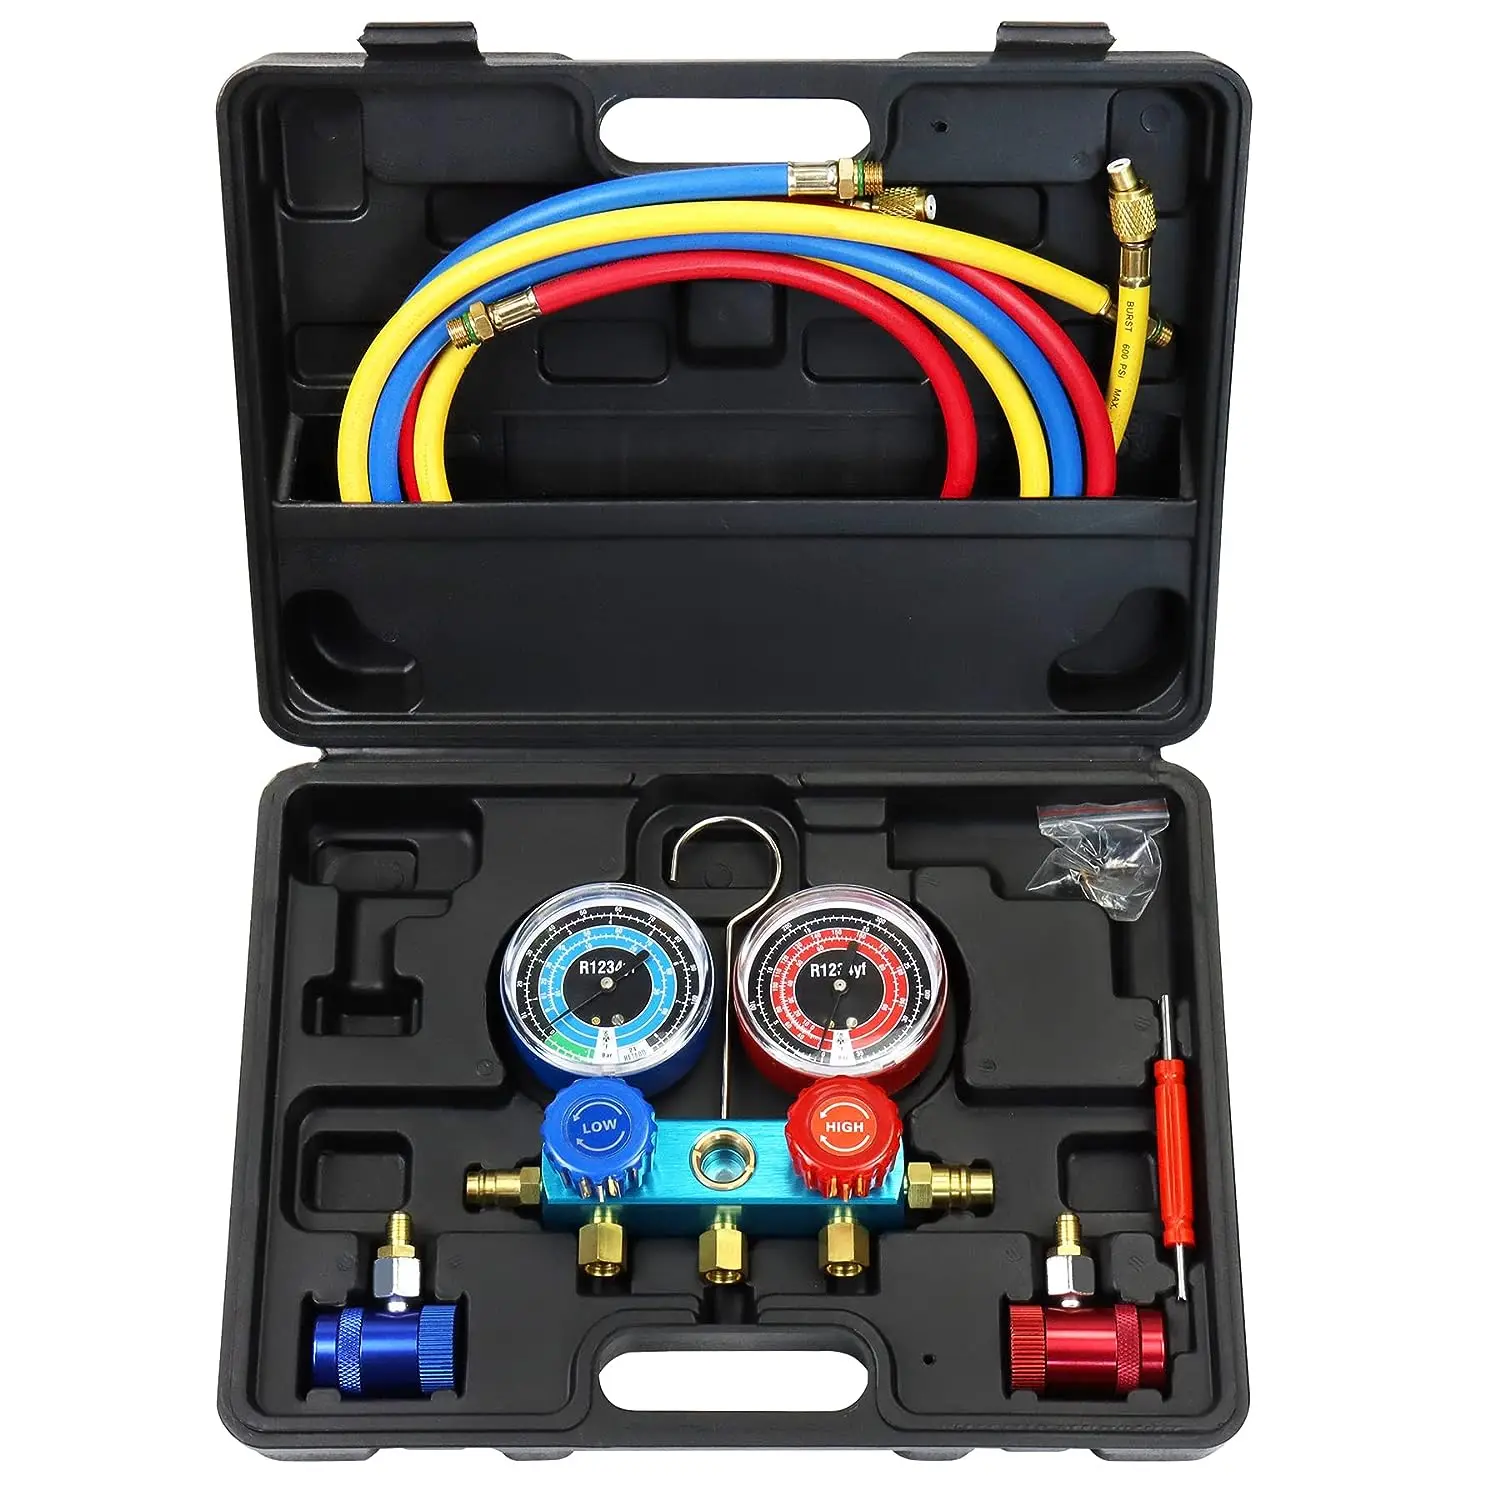 

R1234yf Manifold Gauge Set, 3 Way Car Air Conditioning 1234yf Refrigerant Recharge Tool Kit, with Hoses Quick Coupler Case, for